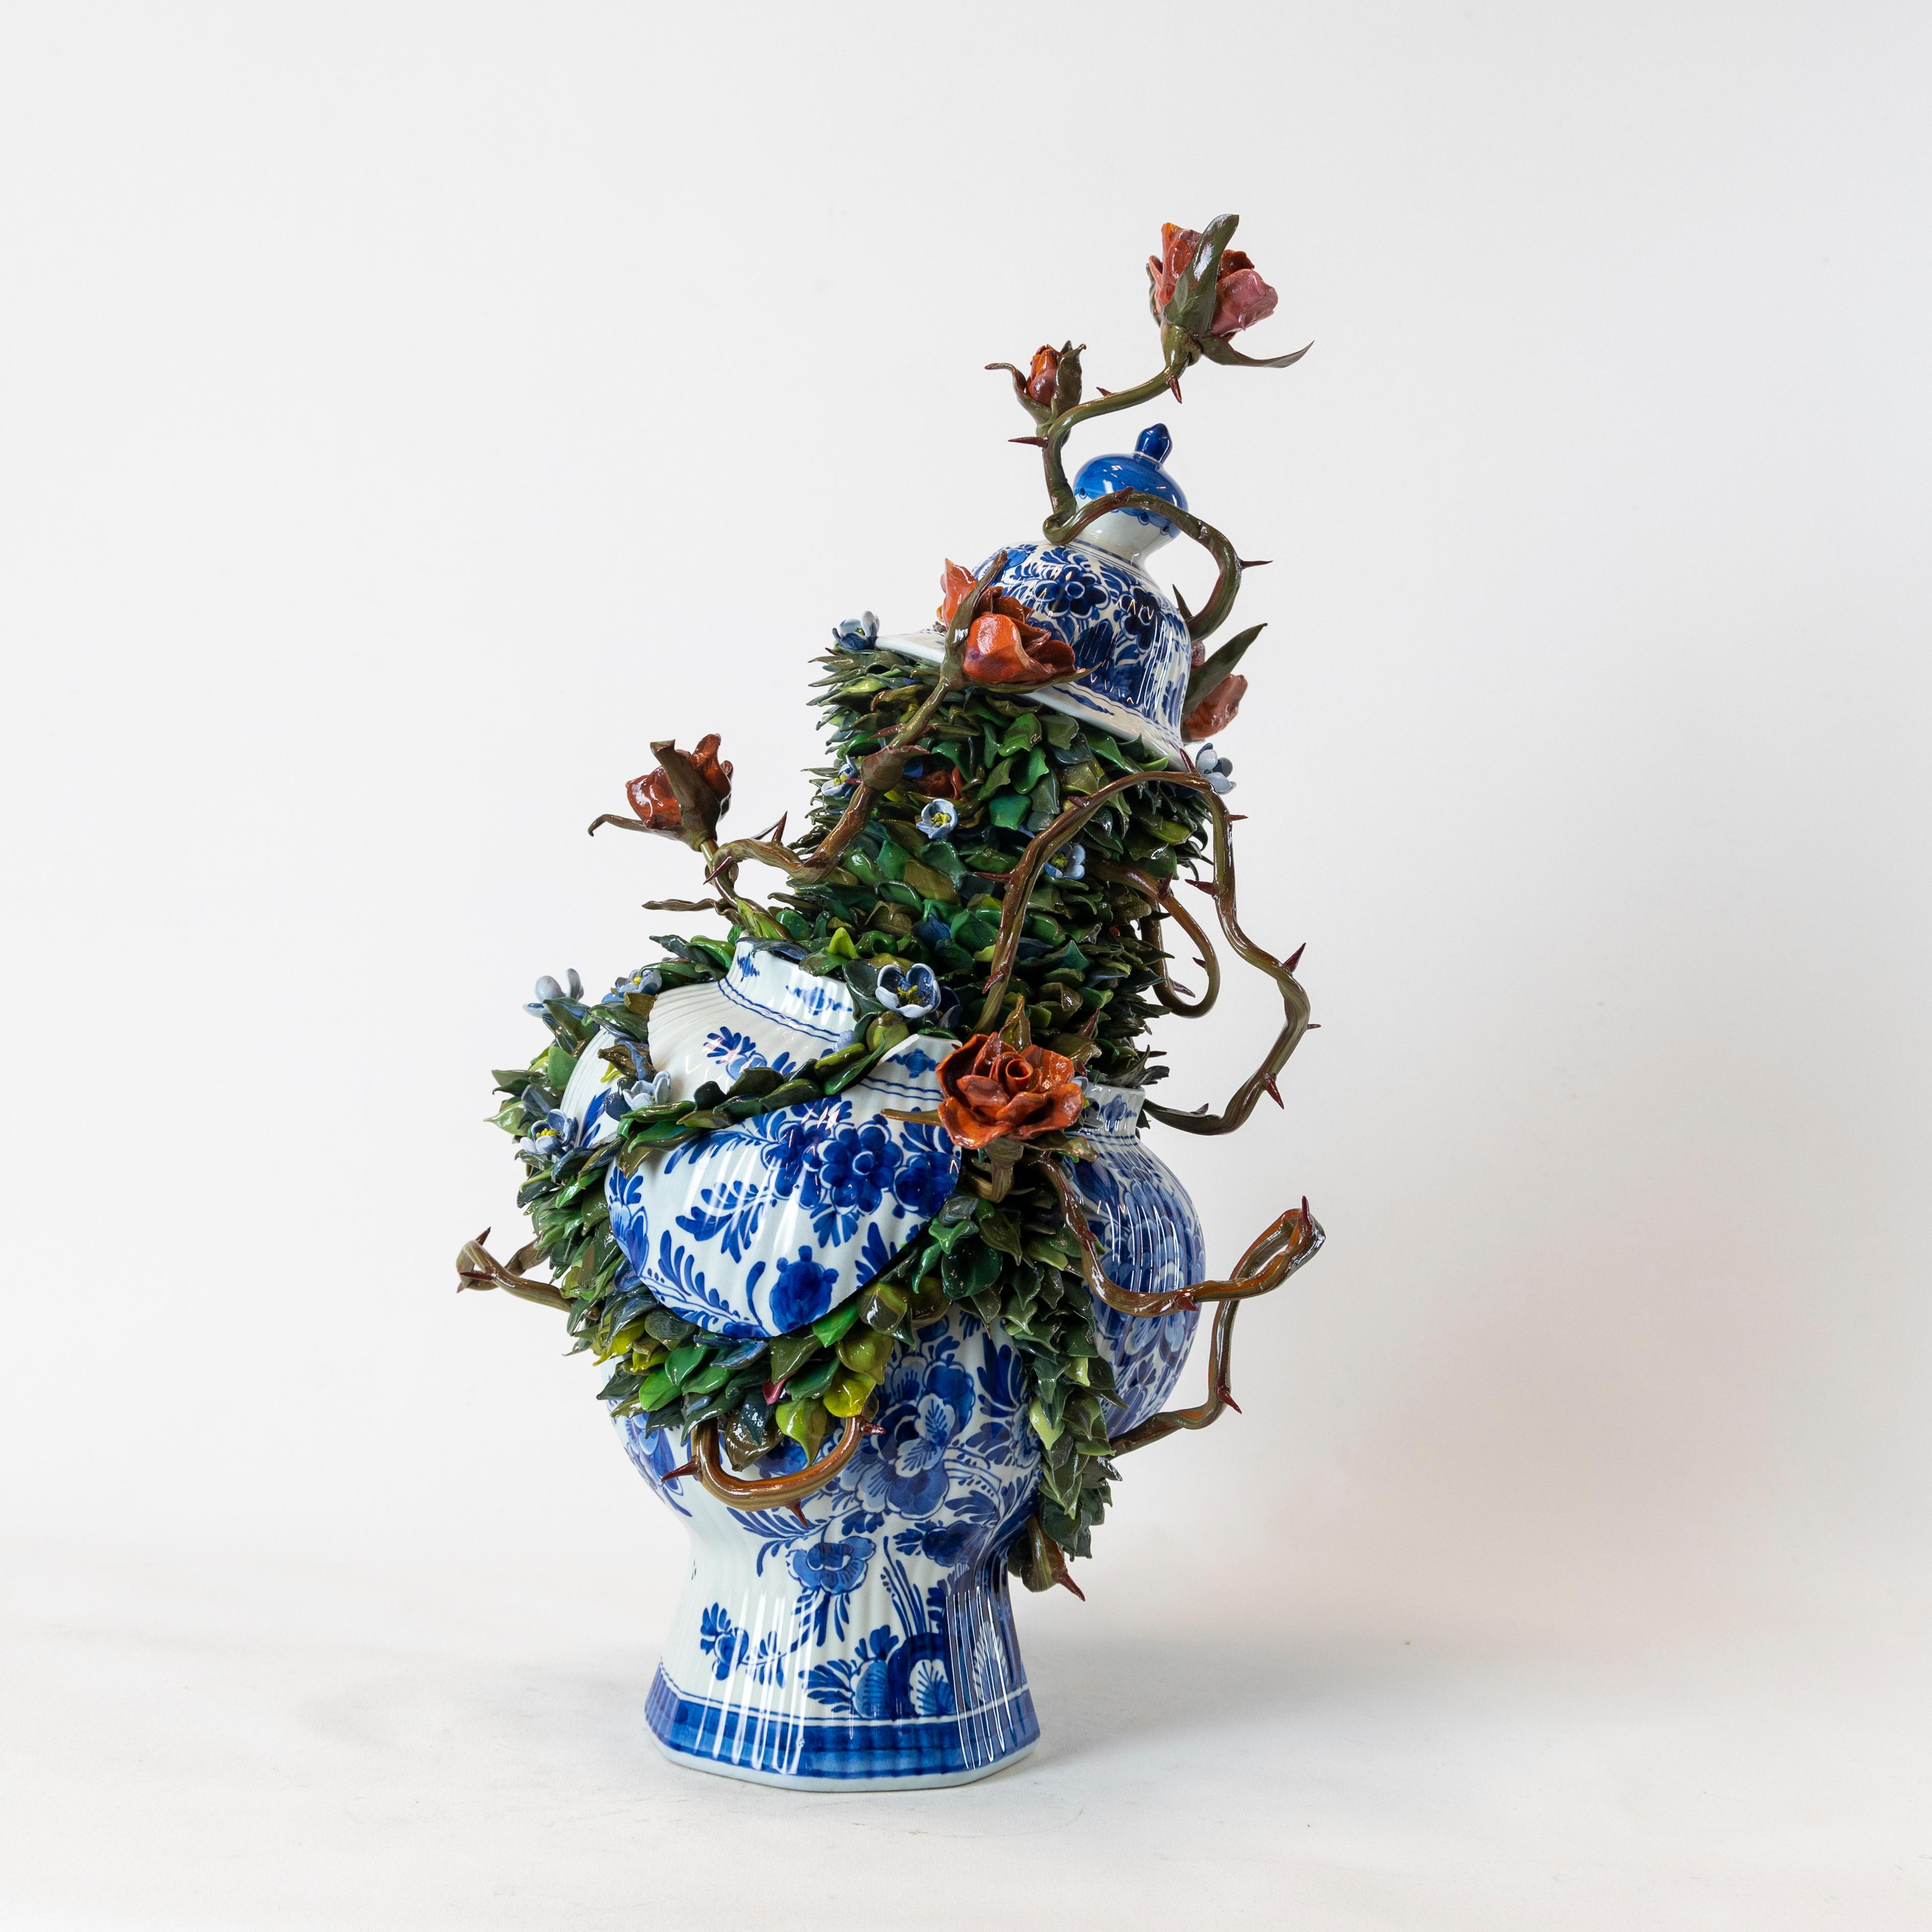 Patrick Bergsma (b. 1965) is a Dutch sculptor and ceramicist currently working in Heerhugowaard, Netherlands, known for constructing verdant growth emerging from antique pottery. The son of antique shop owners and grandson of an avid porcelain